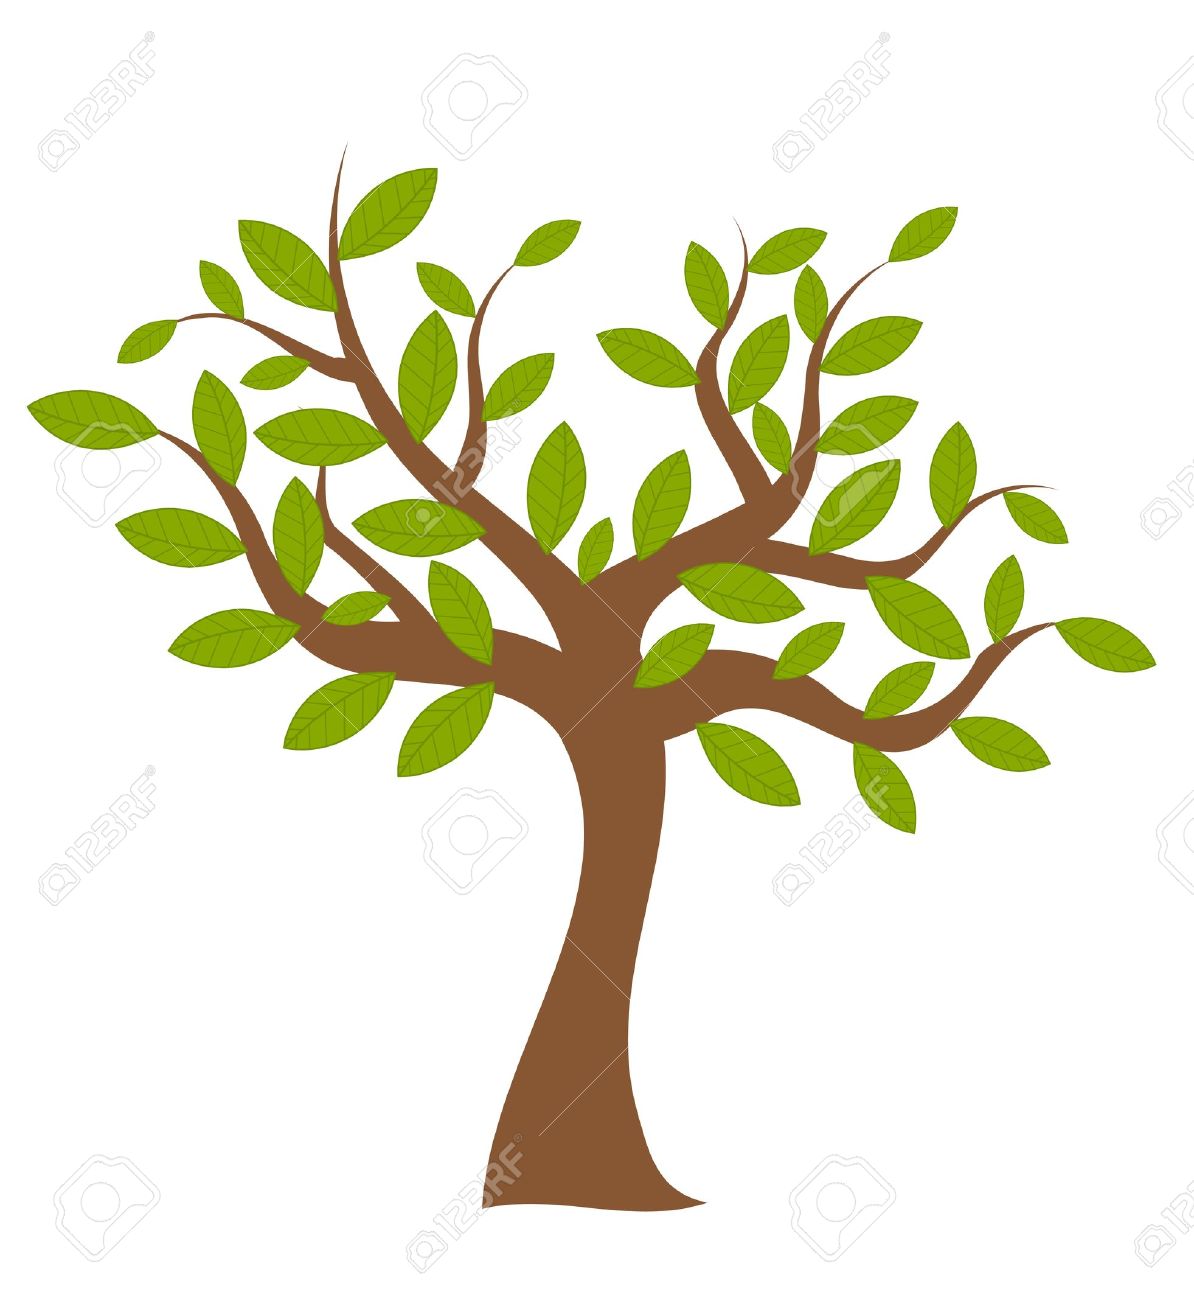 clipart of a tree with leaves - photo #5